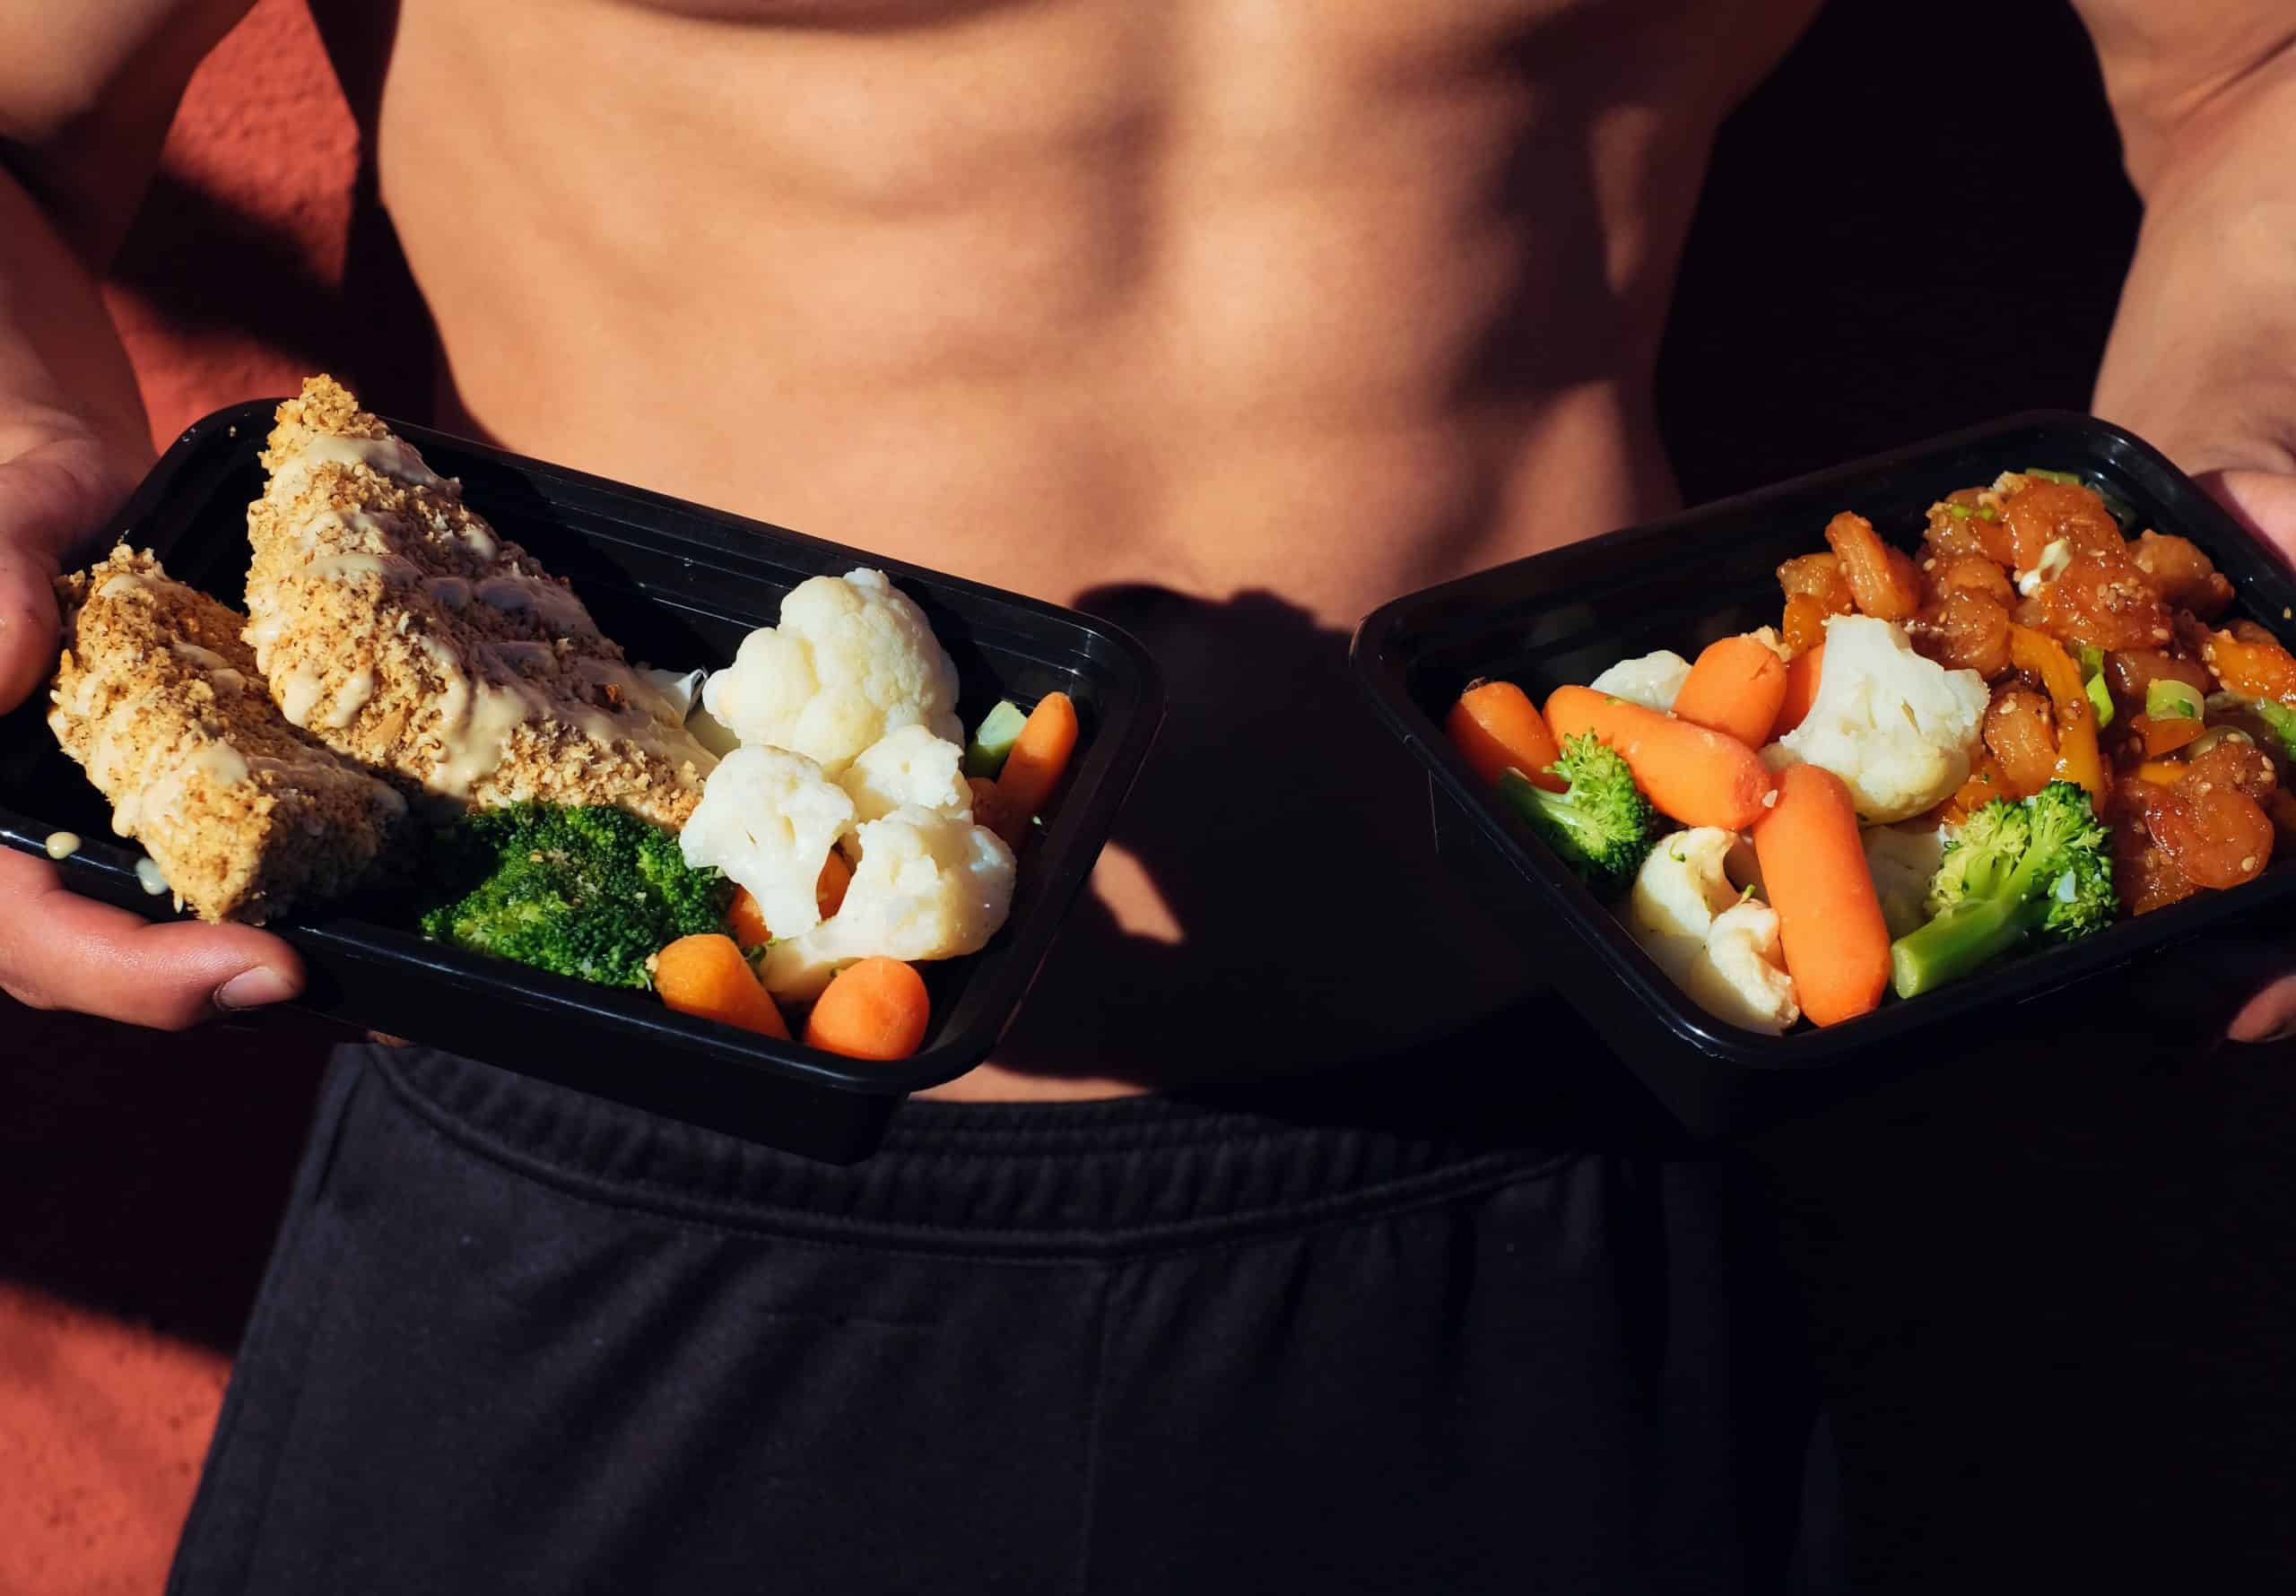 Fat loss meal plans